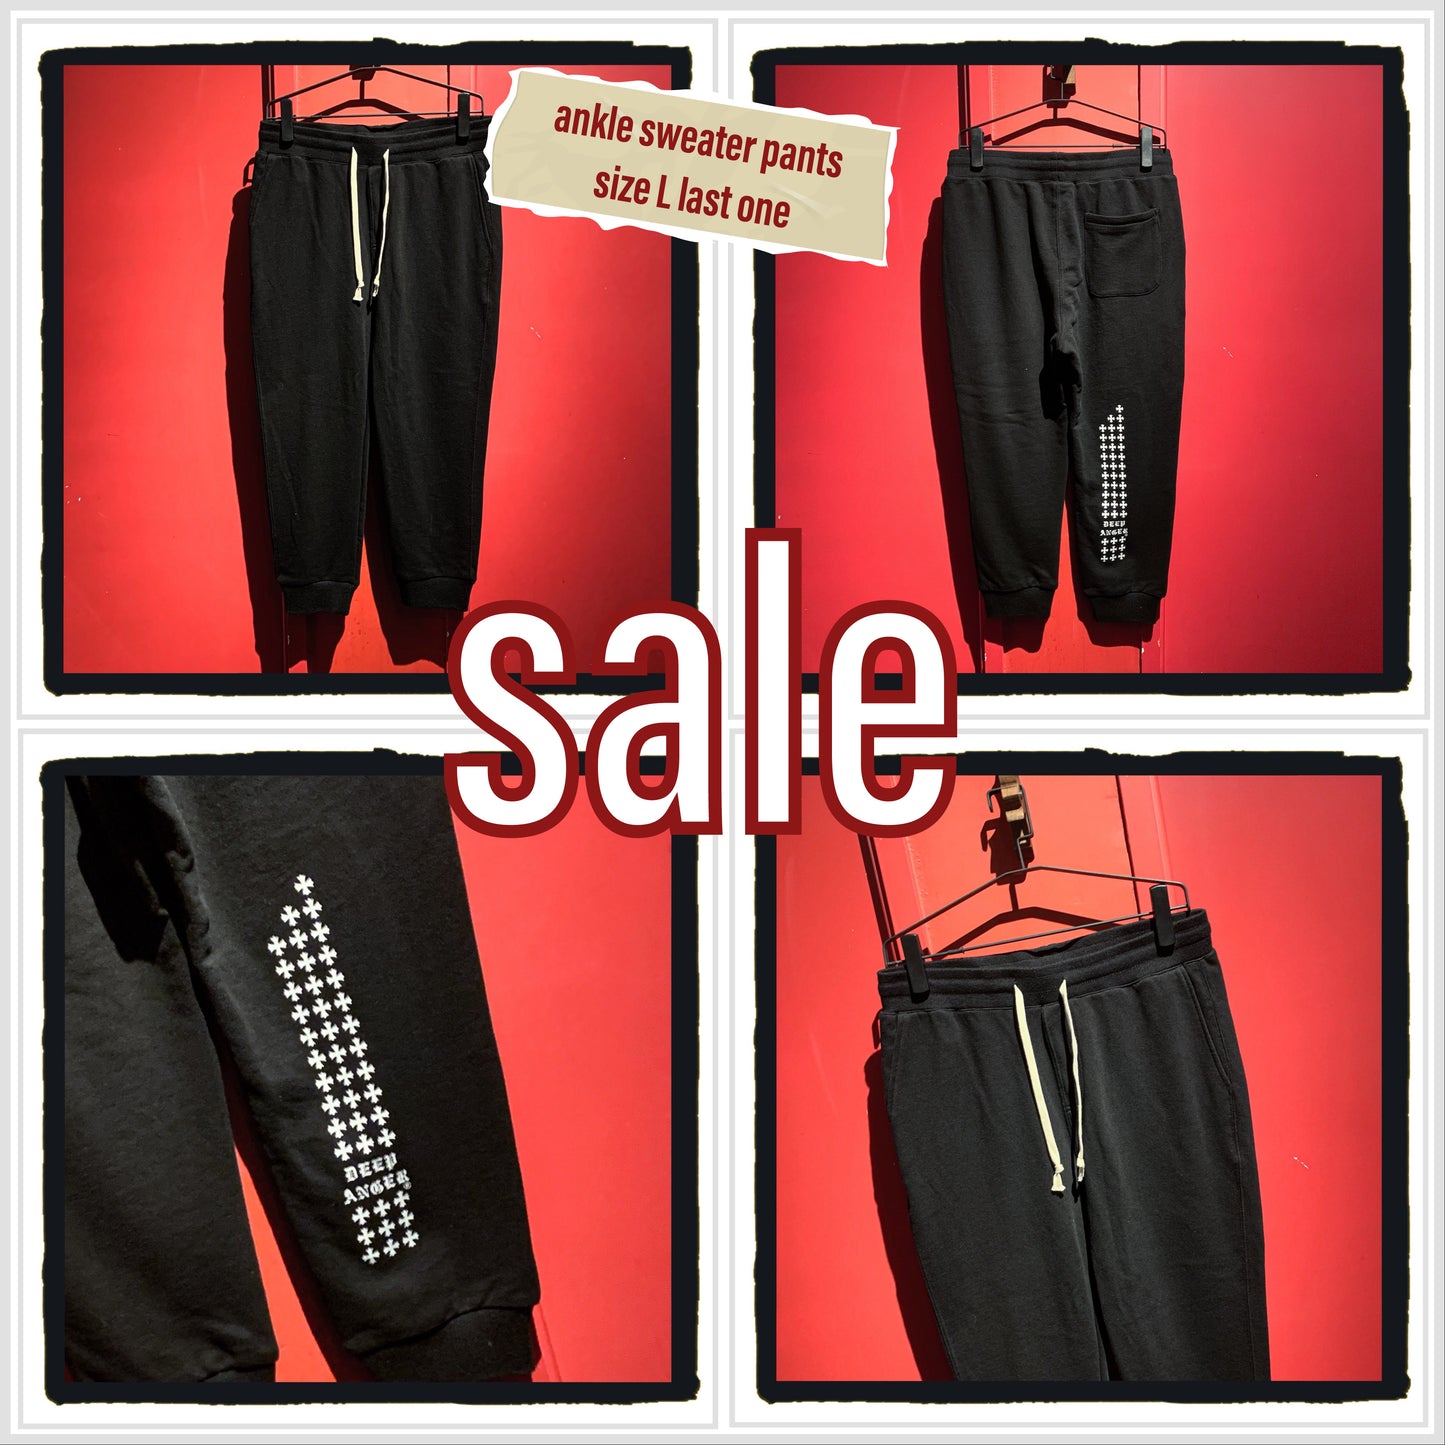 sale - ankle sweater pants